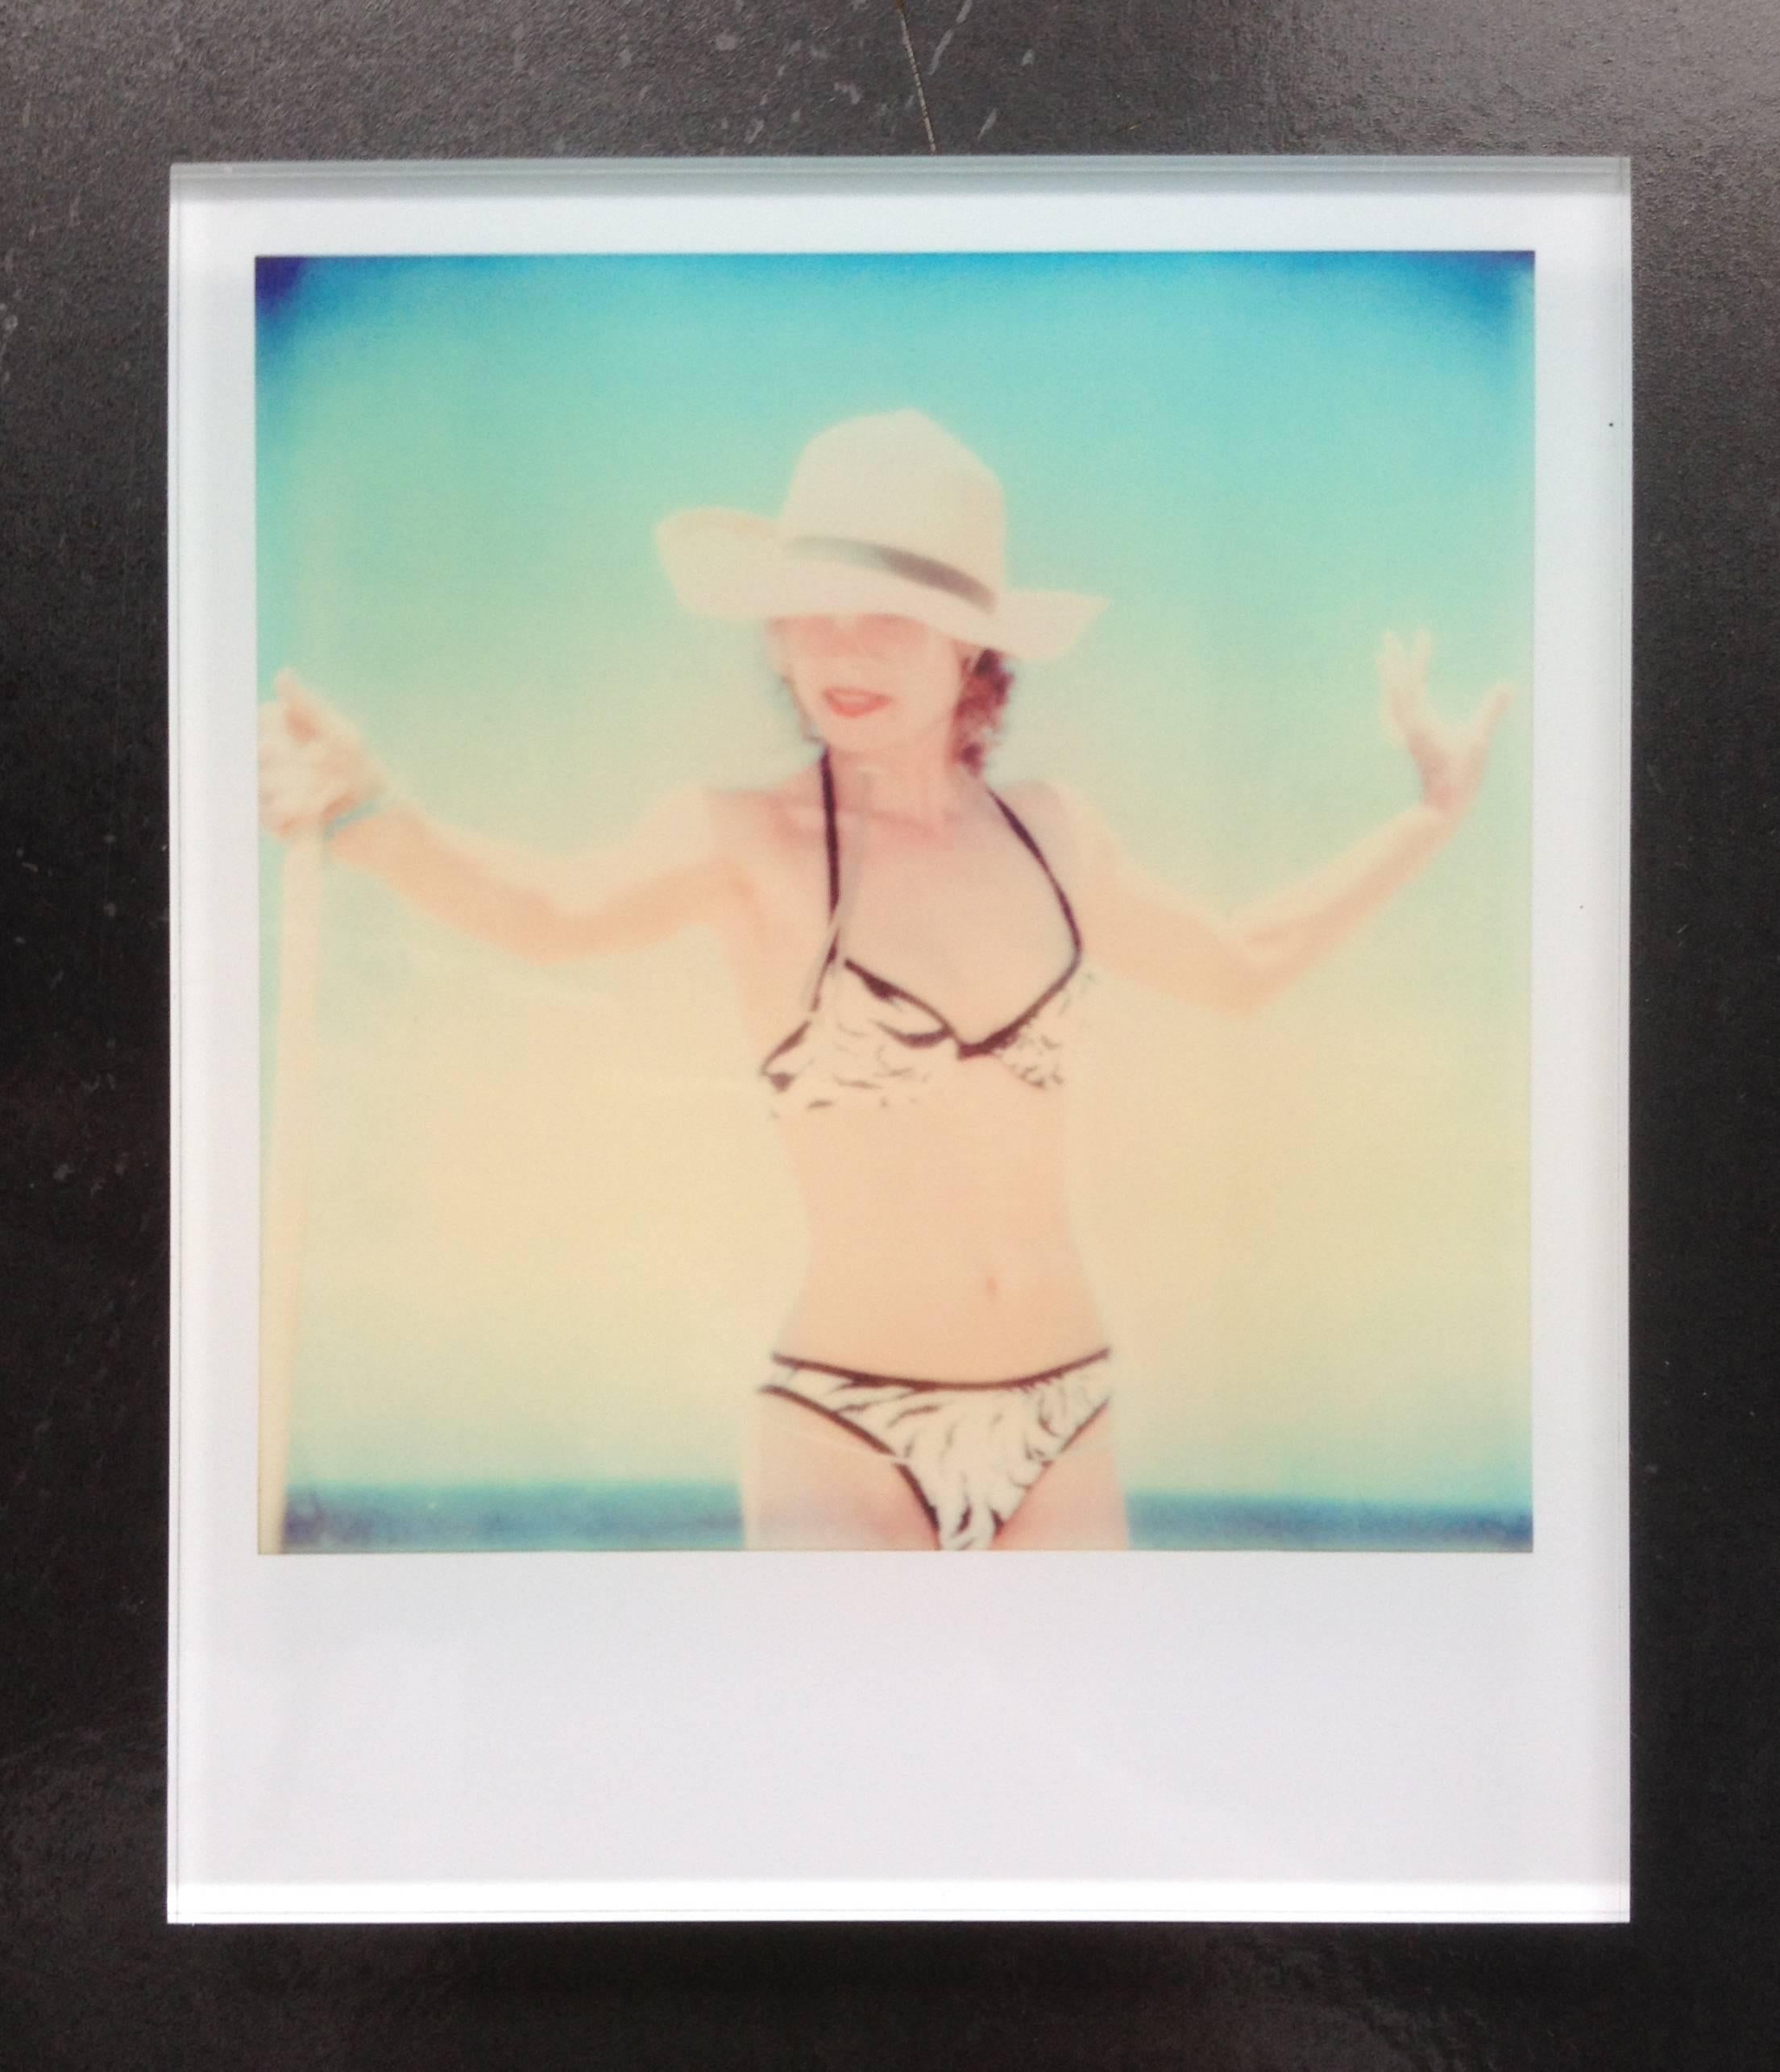 Stefanie Schneider's Minis
'Untitled #04' (Beachshoot) featuring Radha Mitchell, 2005
signed and signature brand on verso
Lambda digital Color Photographs based on a Polaroid

Polaroid sized open Editions 1999-2013
10.7 x 8.8cm (Image